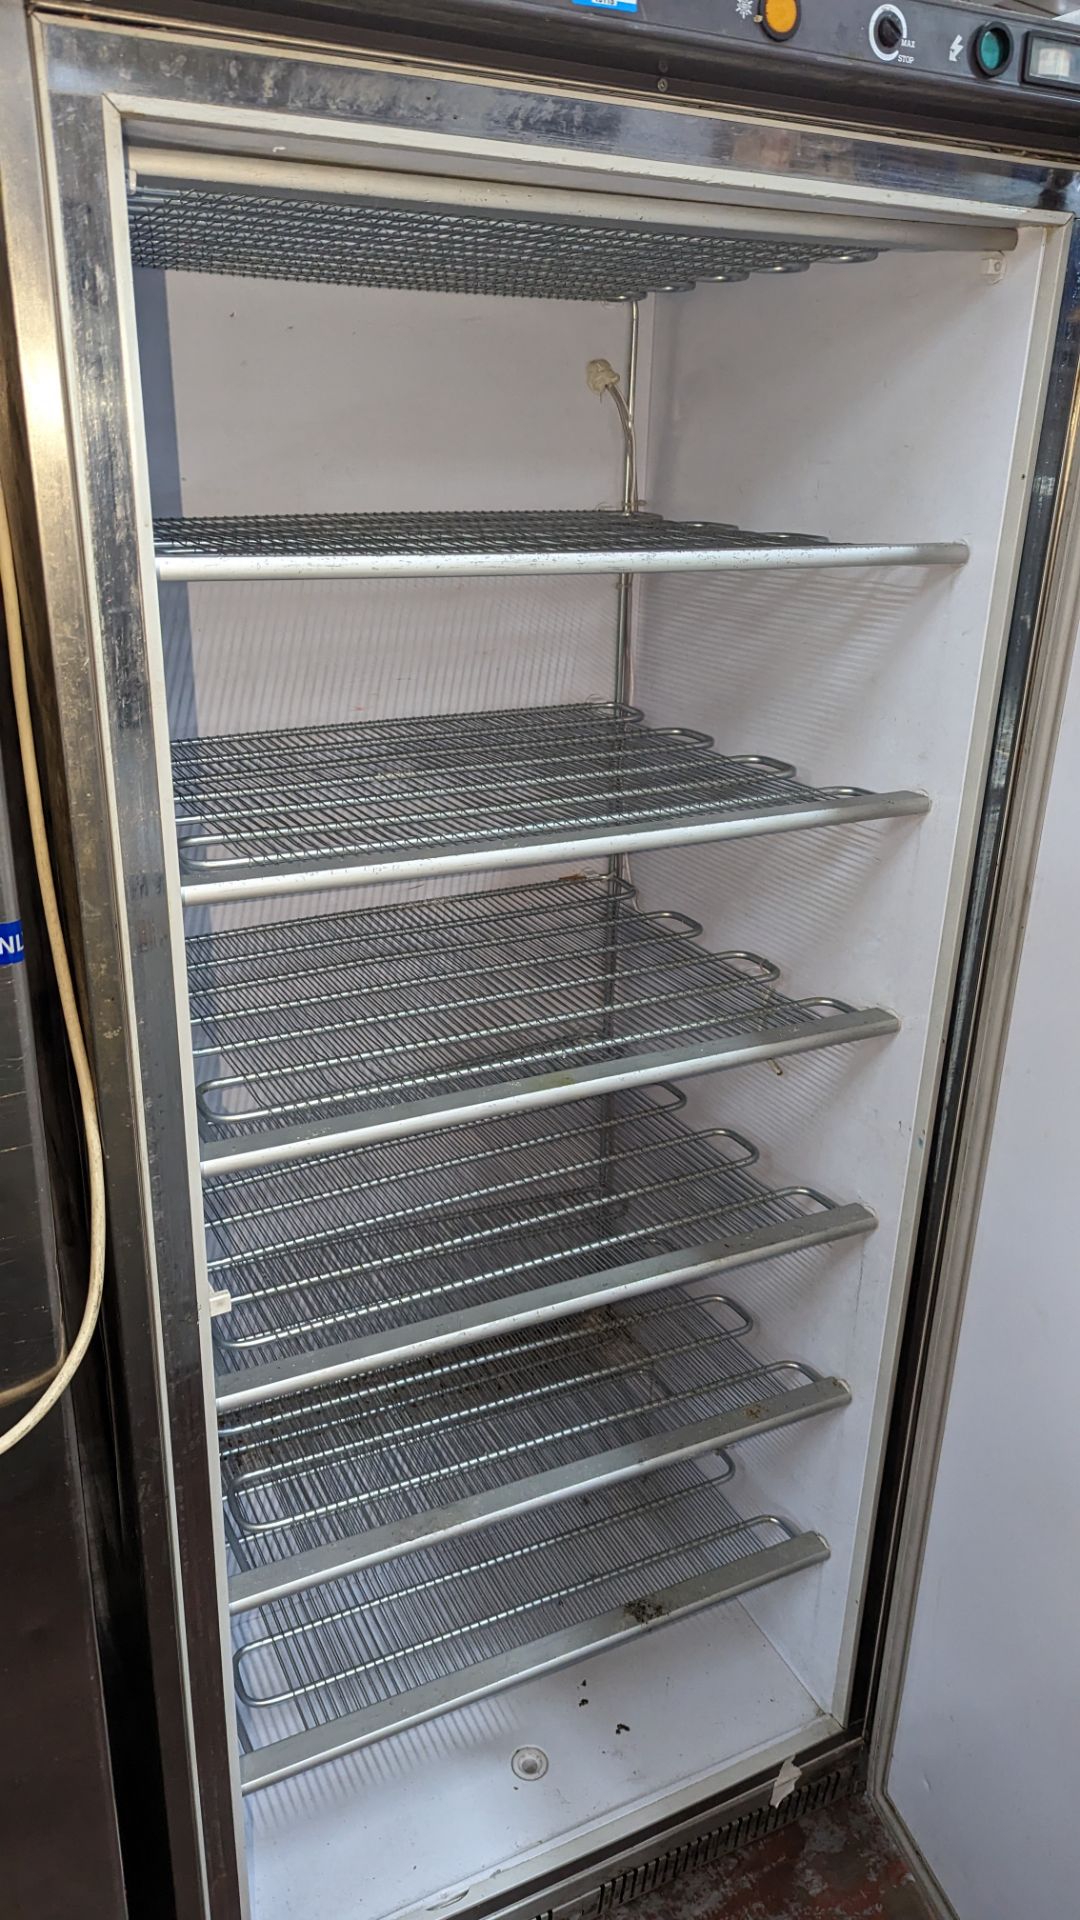 Iarp stainless steel commercial freezer - Image 3 of 4